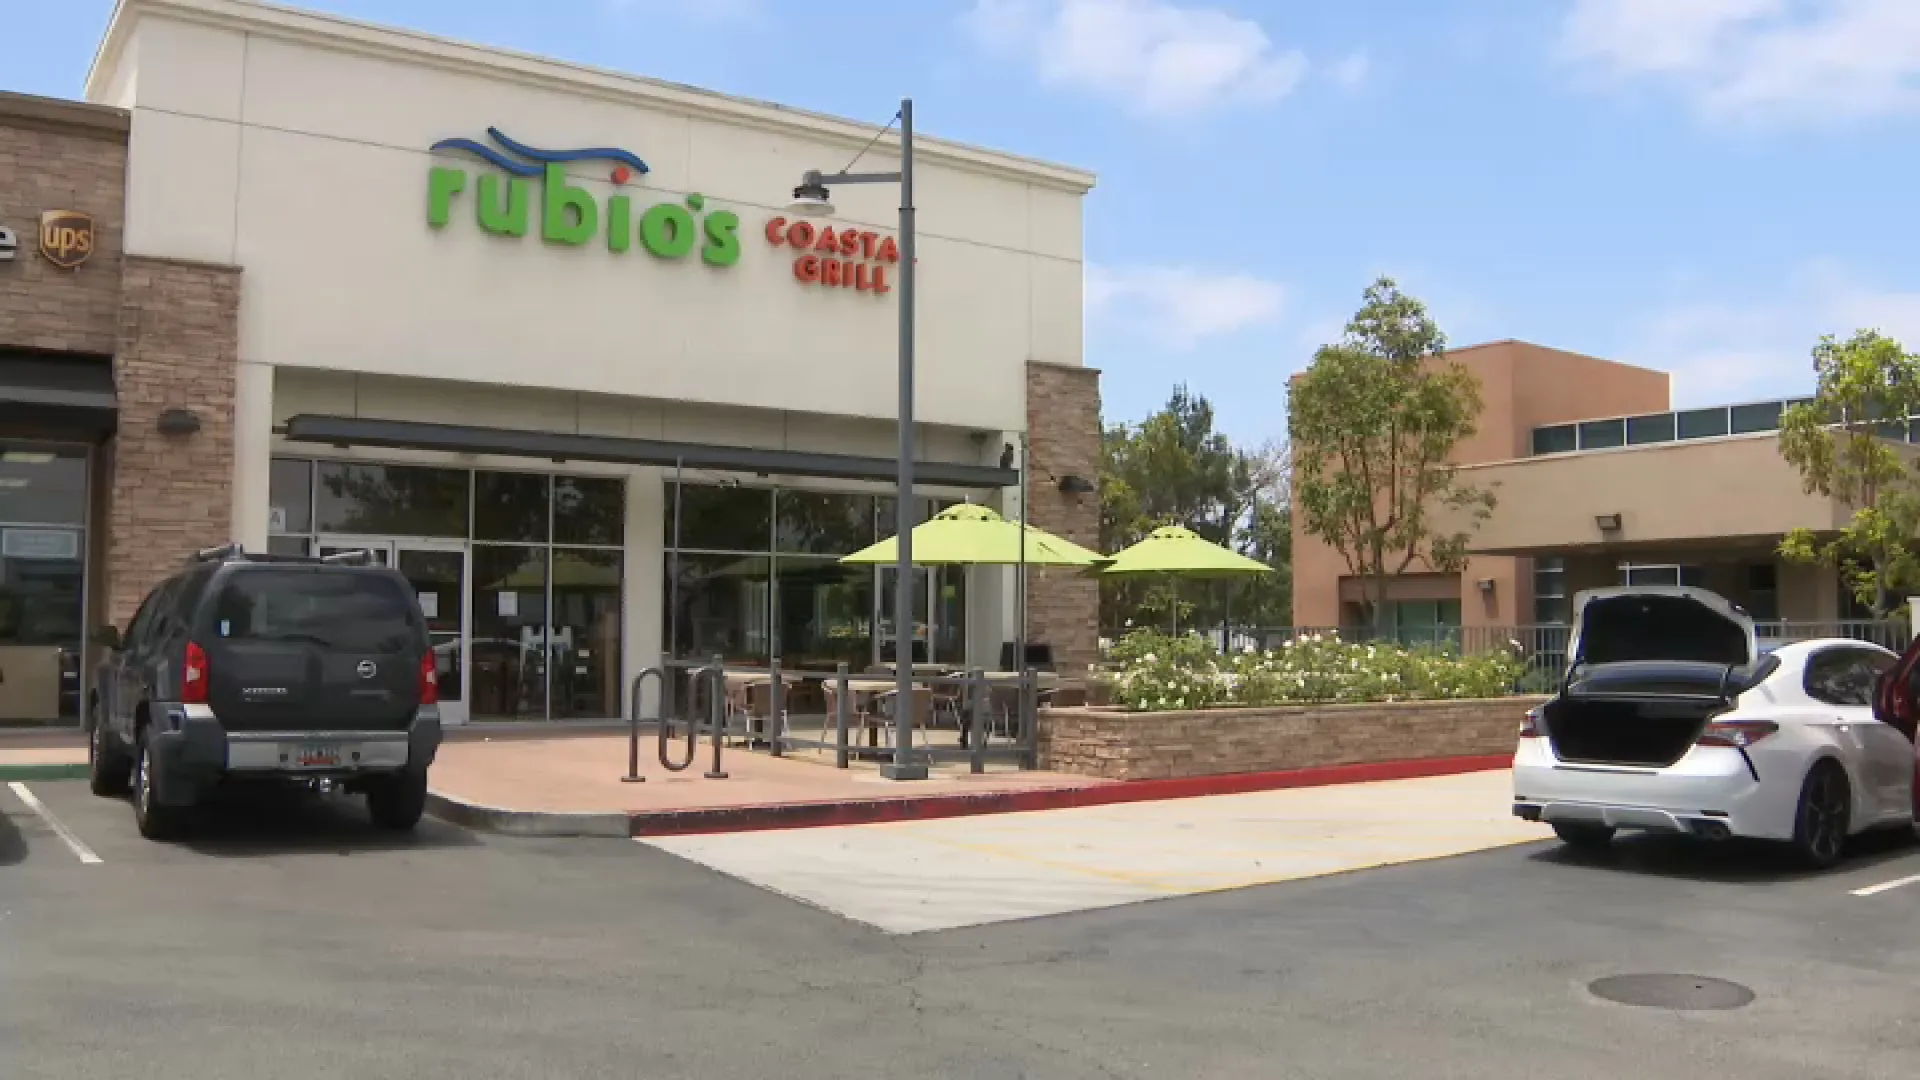 Rubio's Coastal Grill Hits Rough Waters: Iconic Chain Files for Bankruptcy Amid Store Closures